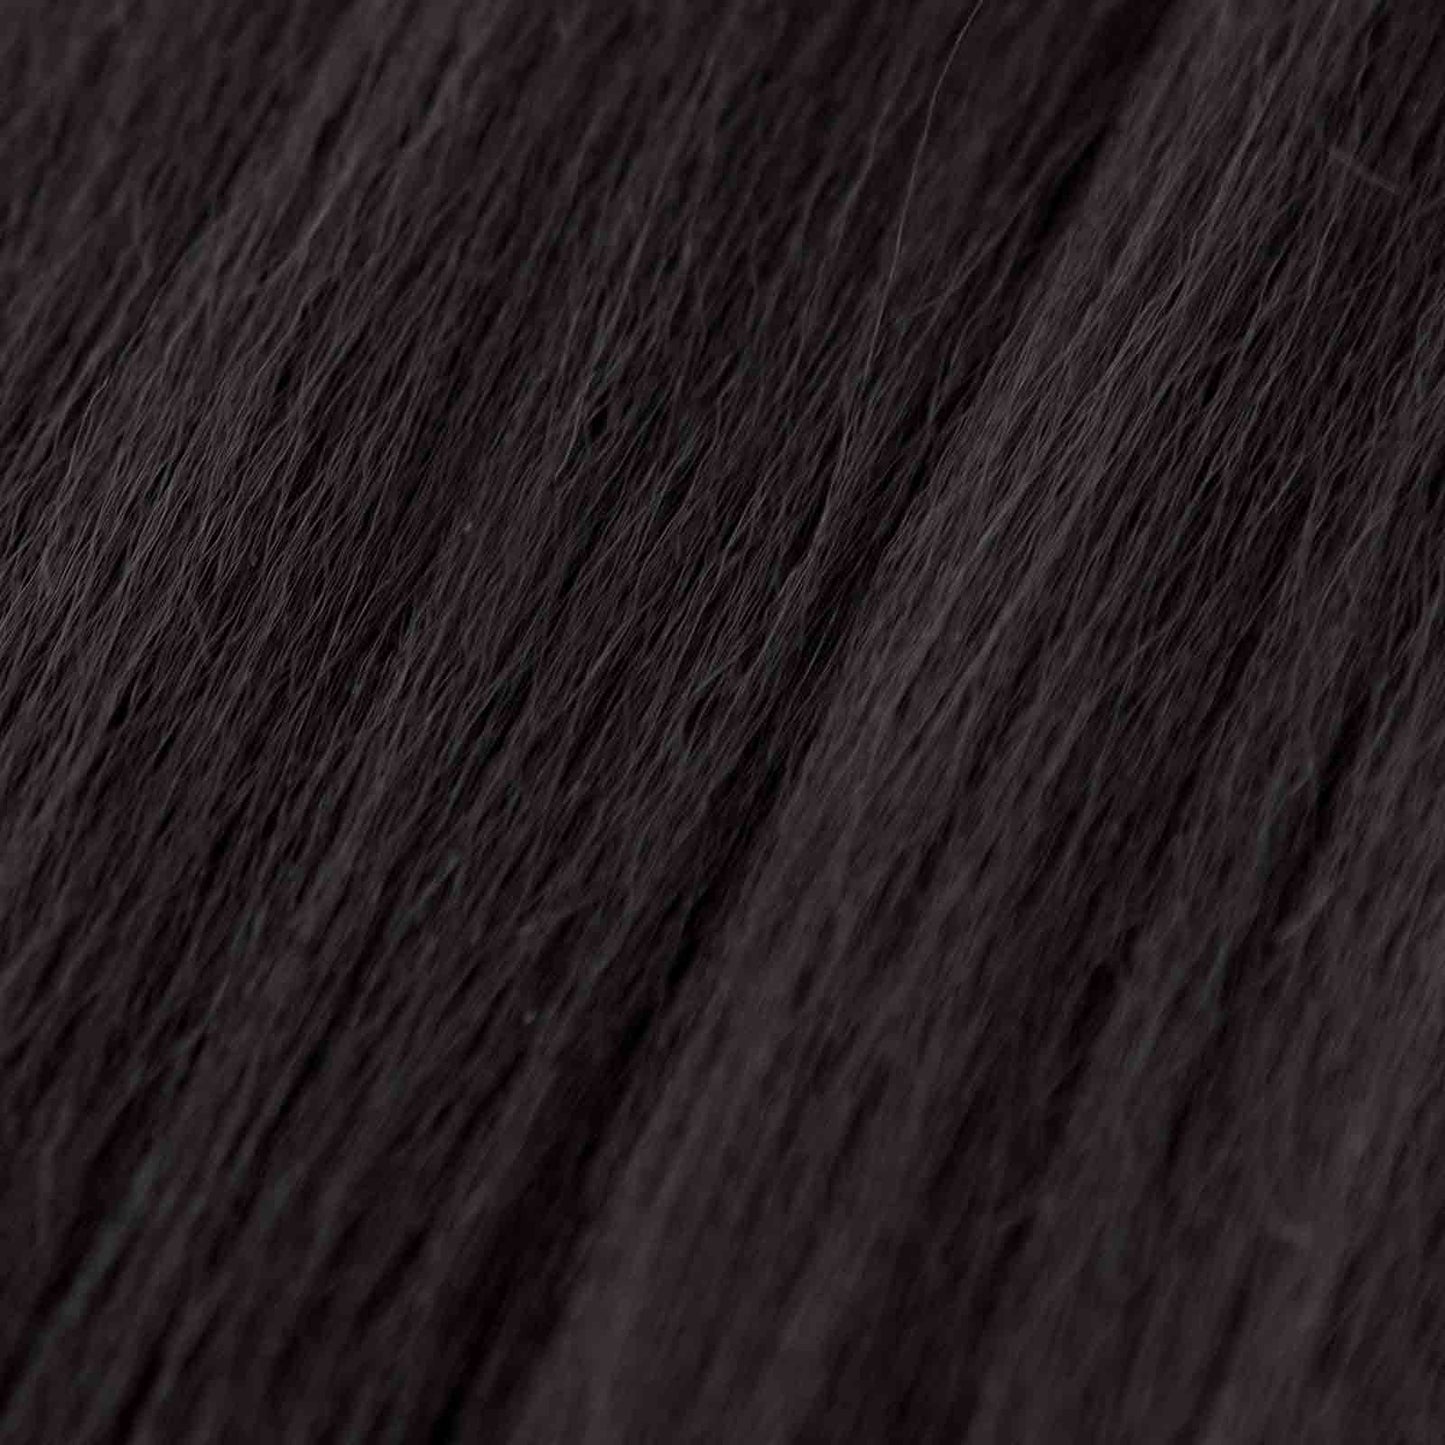 3 x Relaxed Straight Machine Weft Bundle Deal